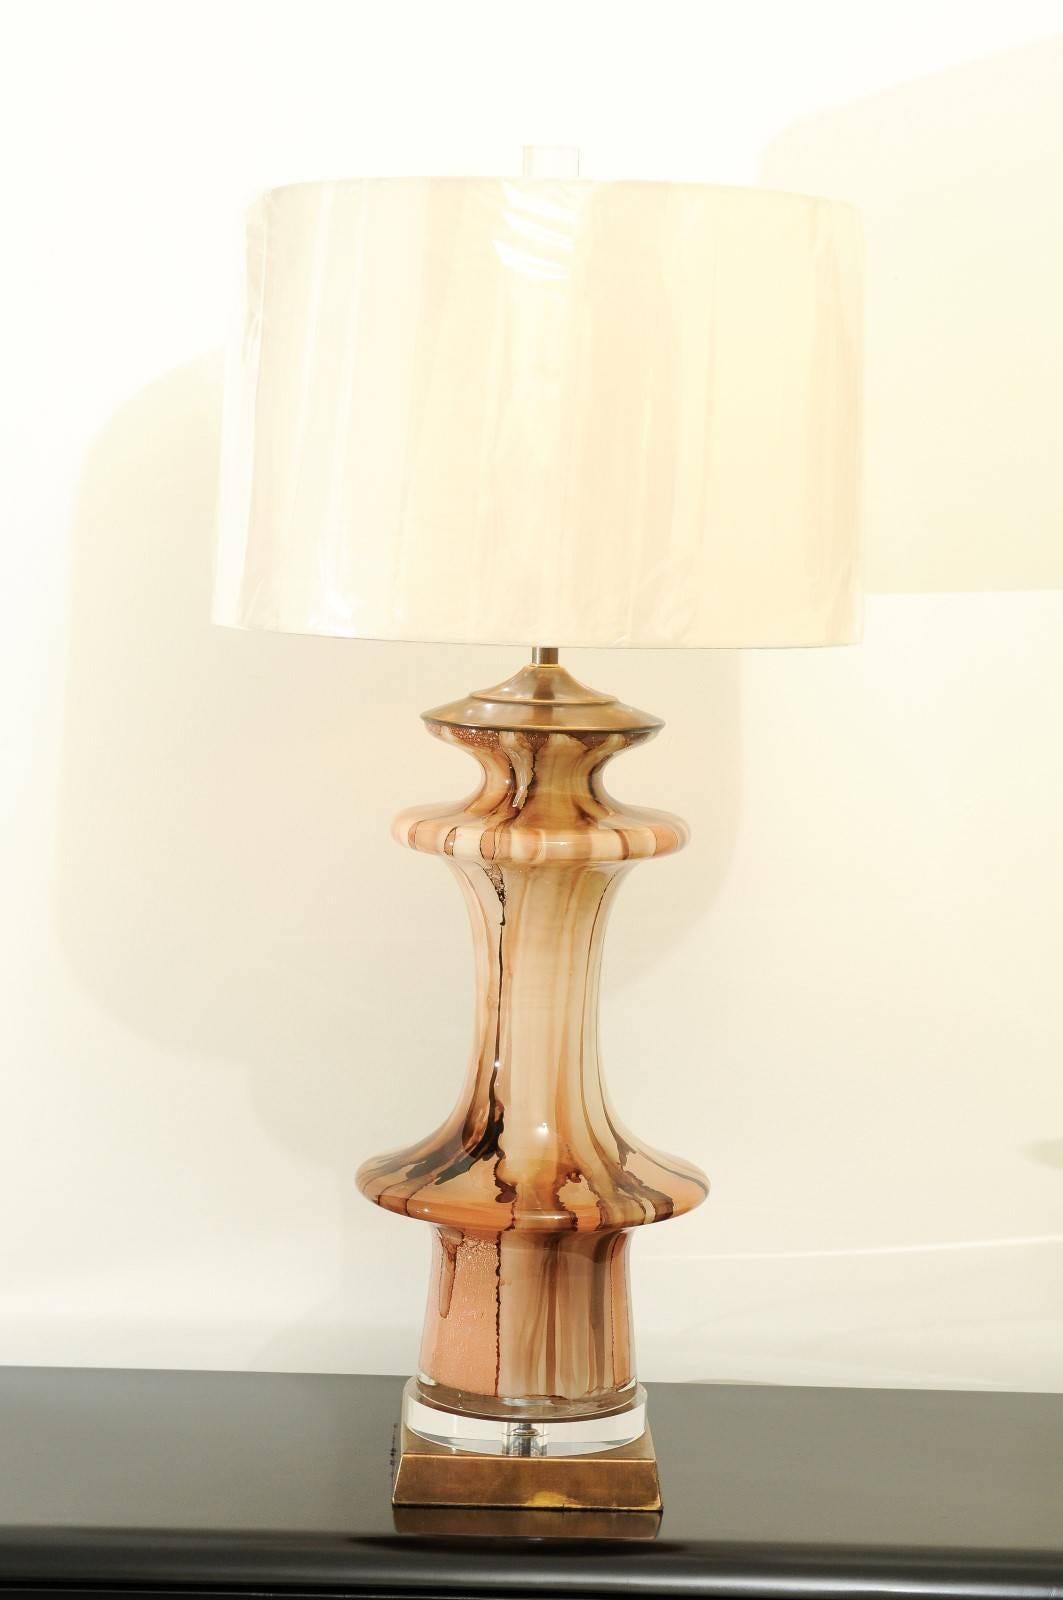 These magnificent lamps are shipped as photographed and described in the narrative. They have been custom built using materials of the highest quality and are shipped complete with the new shades, harps and finials shown in the photos.

A fabulous